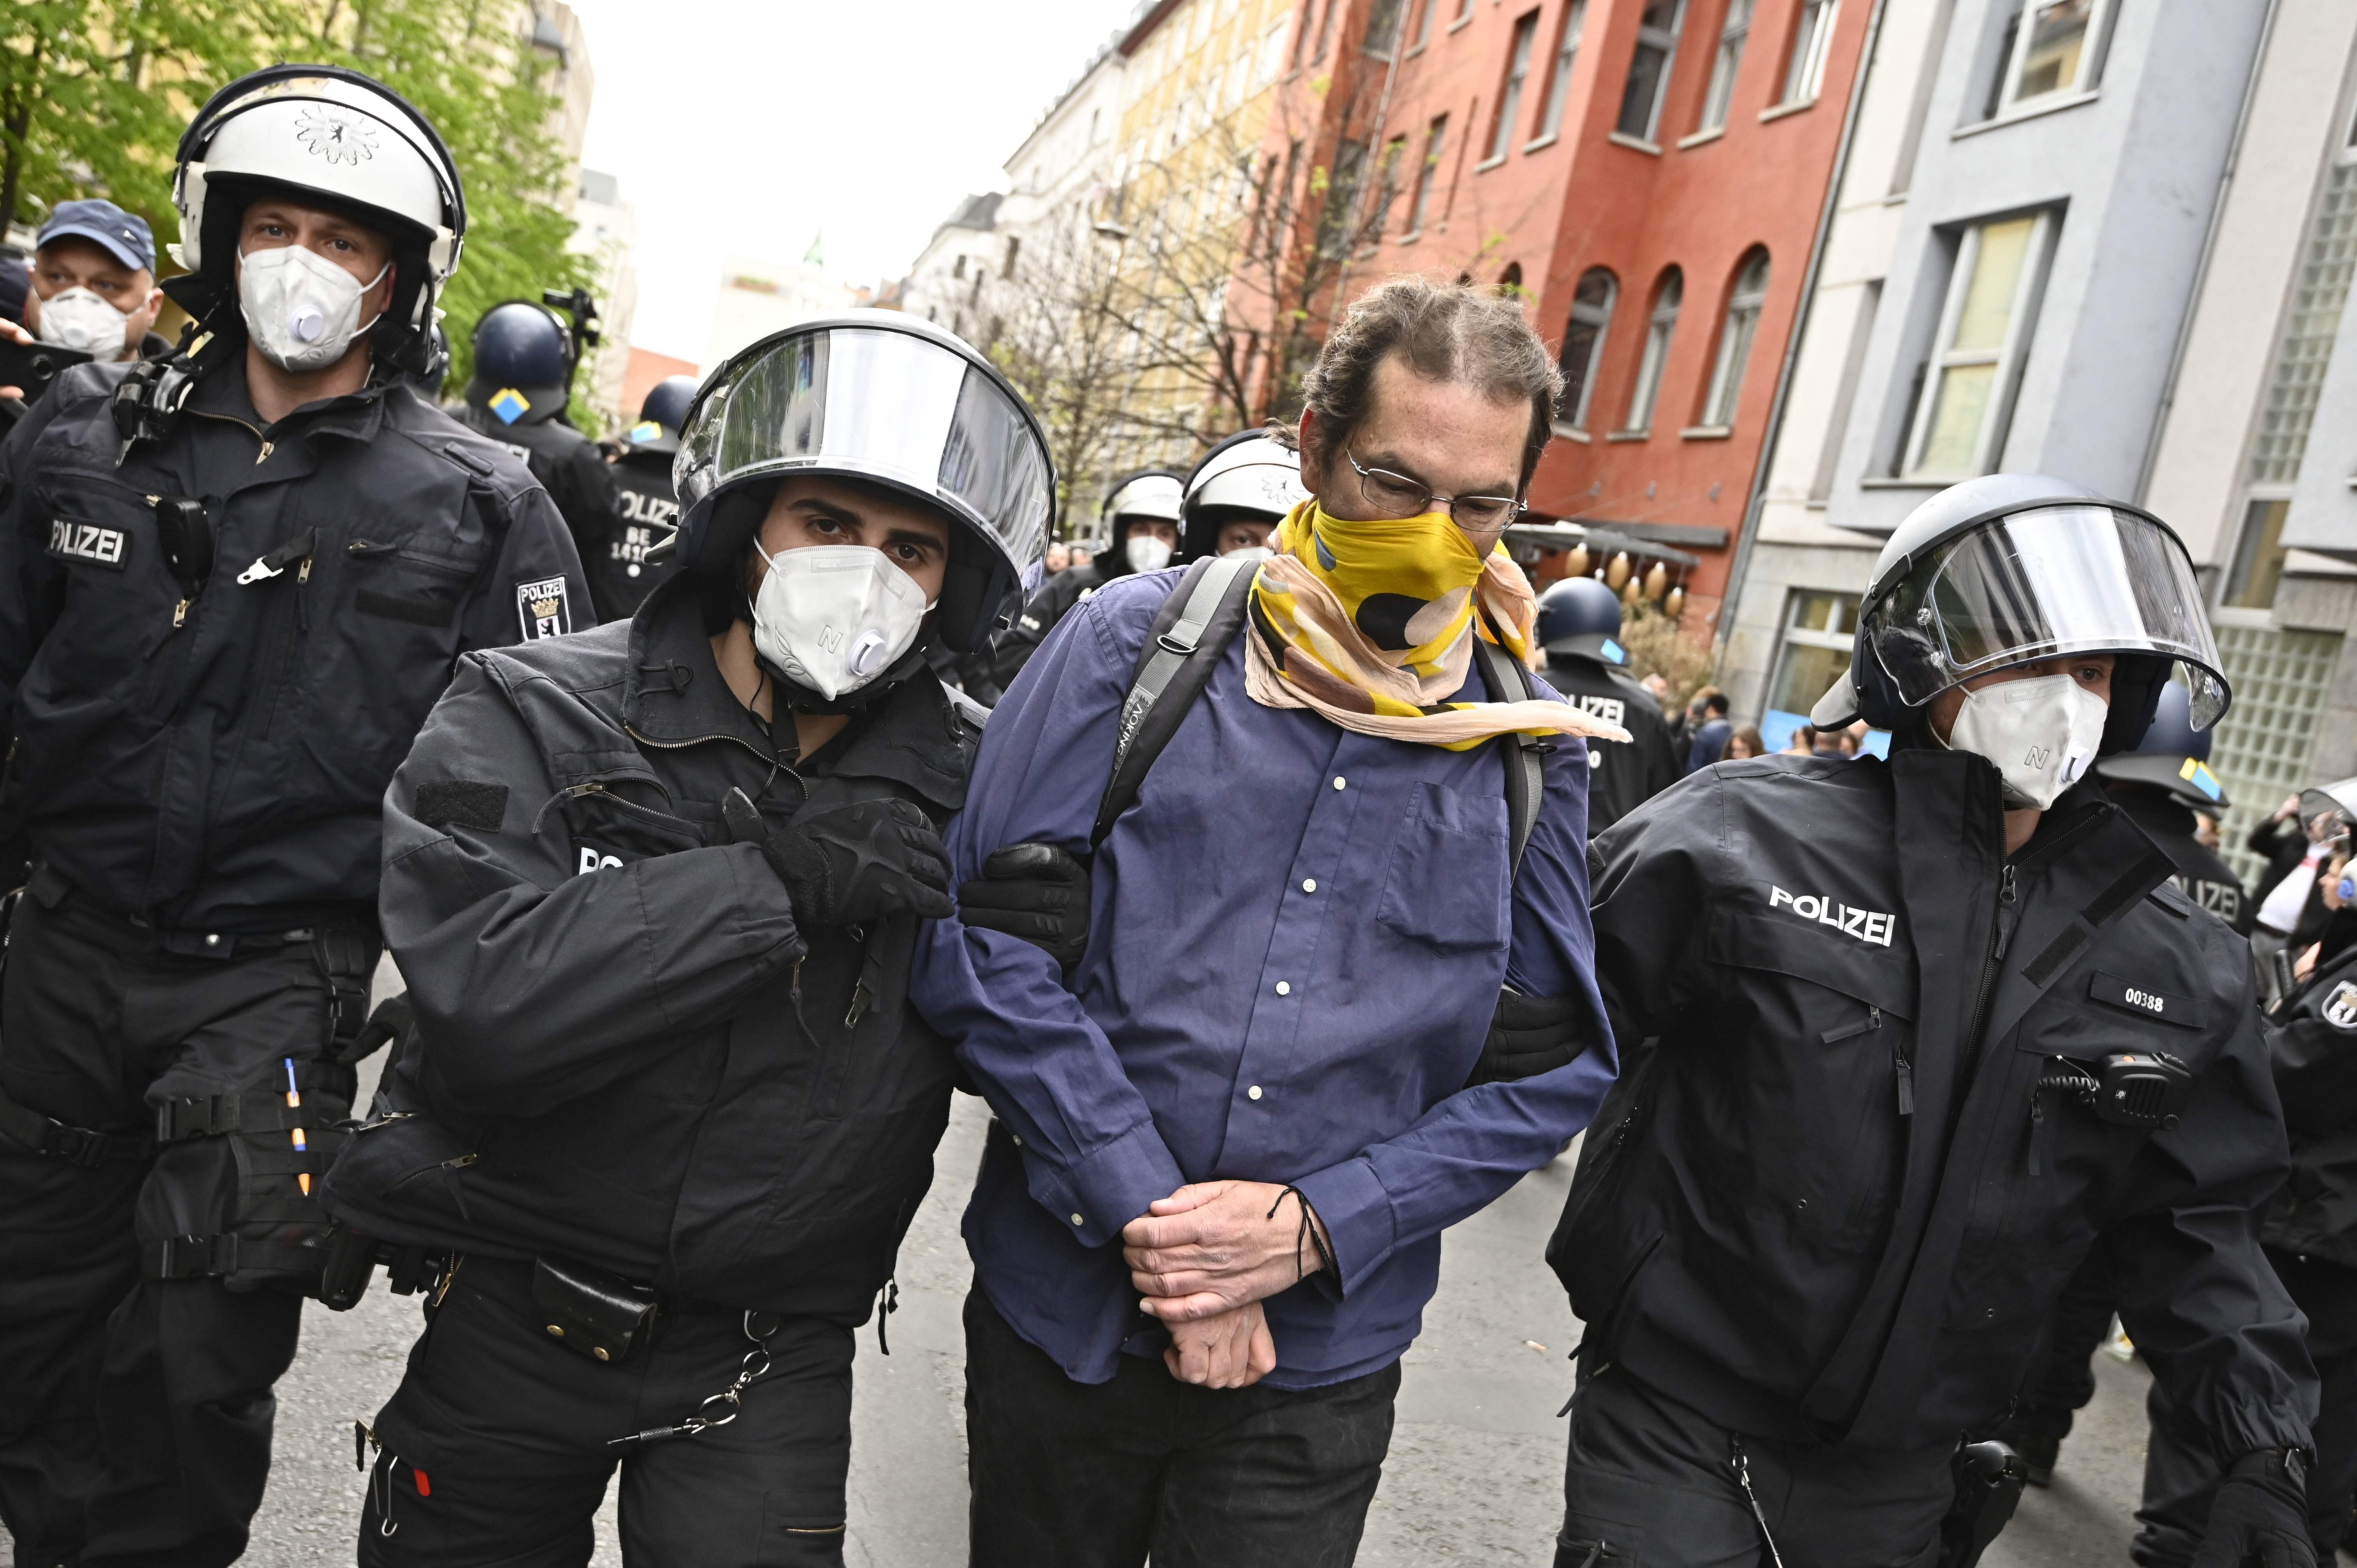 Police remove a demonstrator during a protest against the Corona restrictions in Berlin. (AFP Photo)